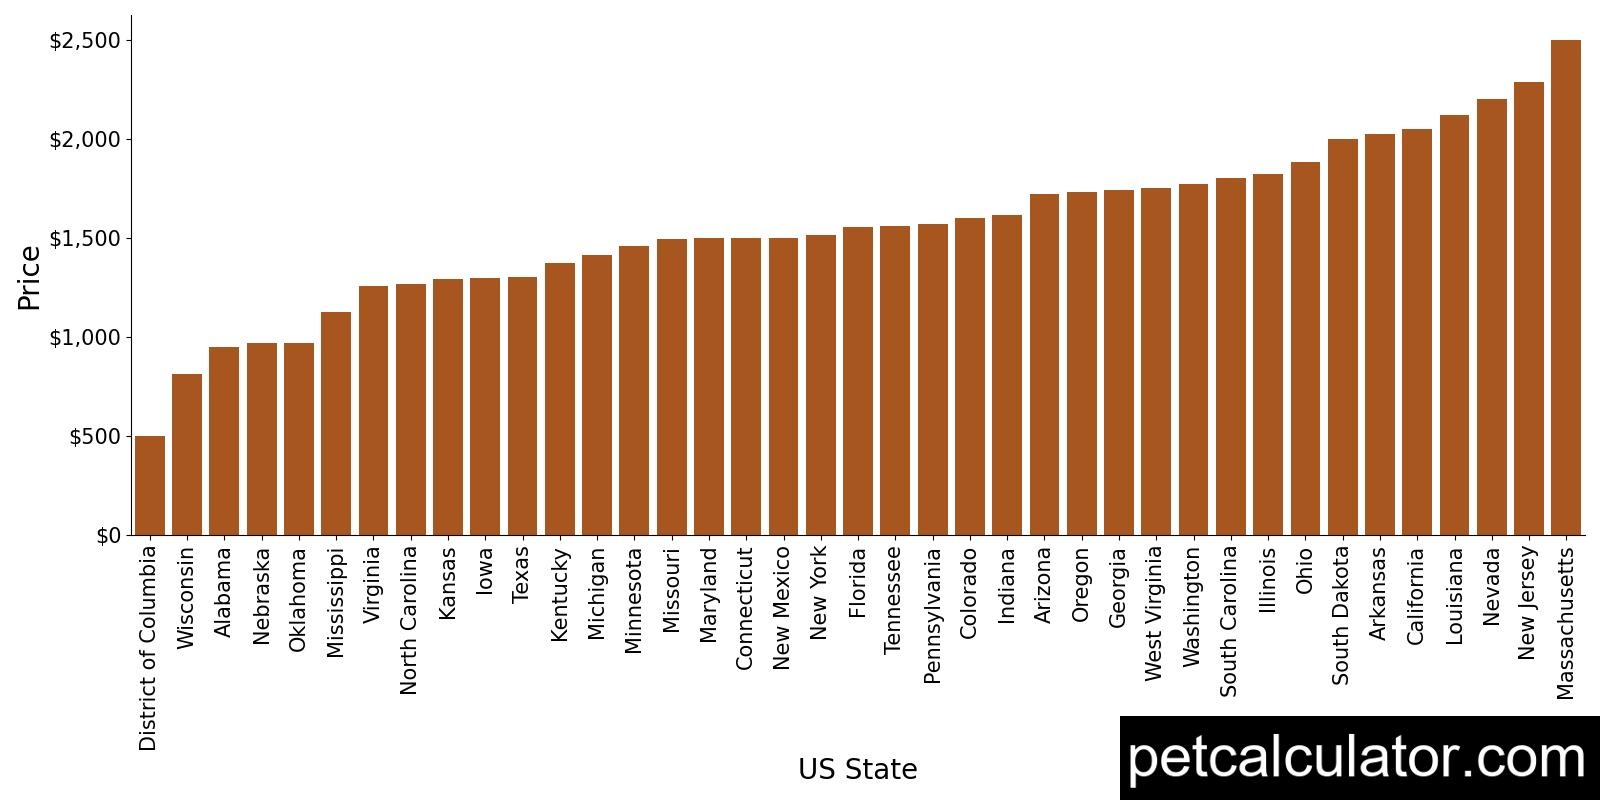 Price of Great Dane by US State 